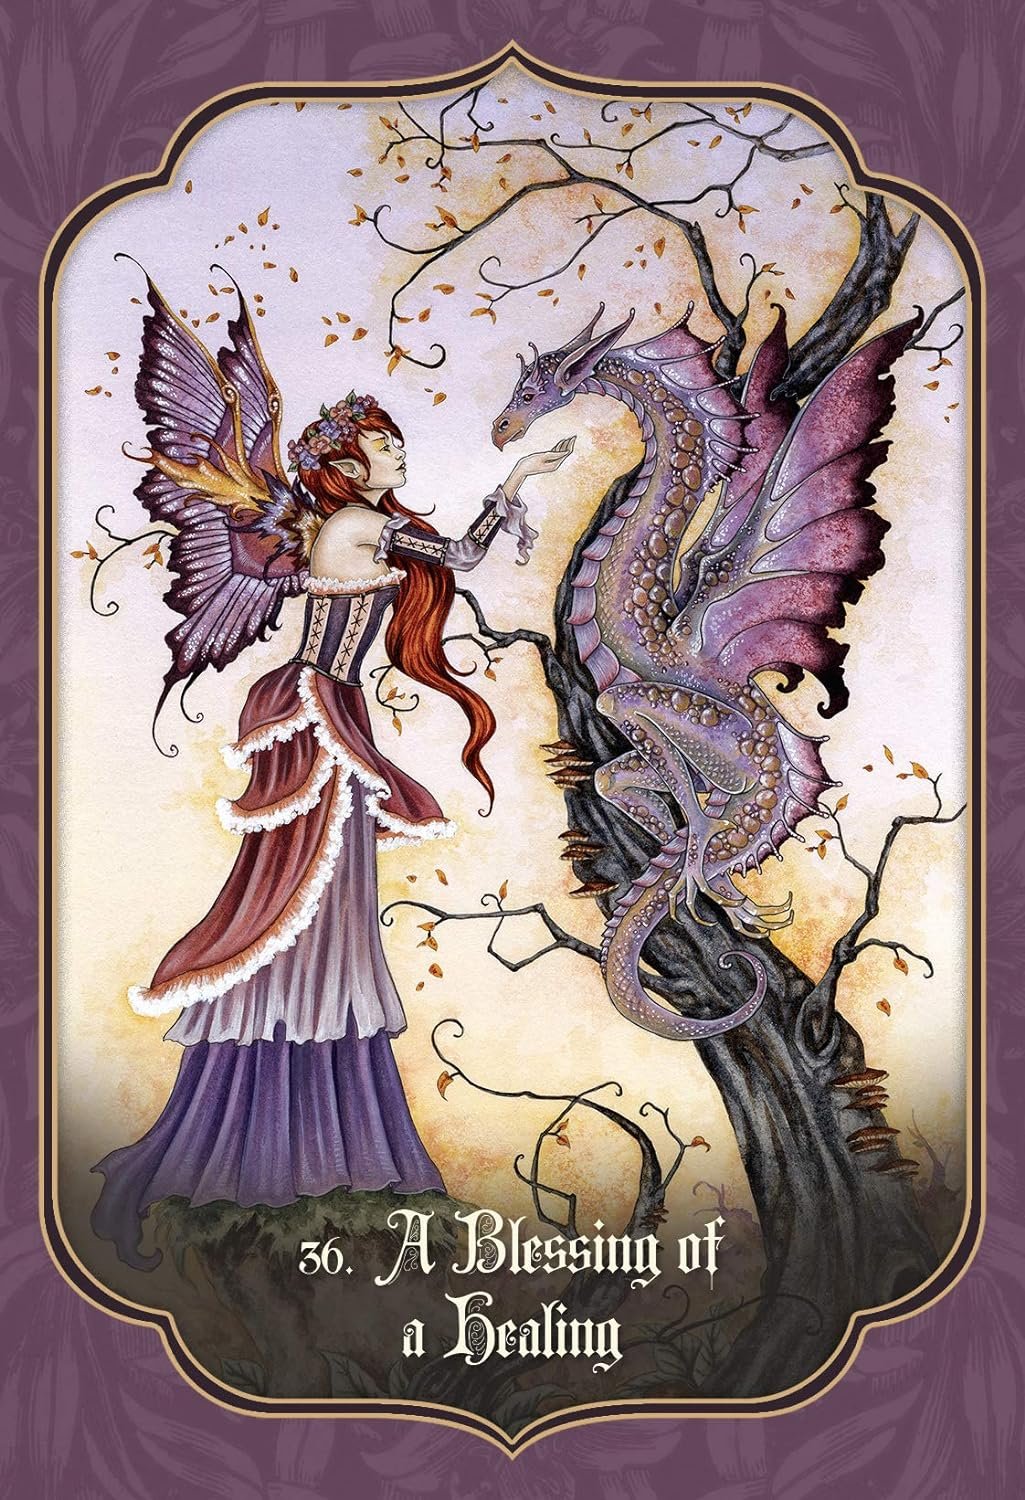 FAERY BLESSING CARDS: Healing Gifts and Shining Treasures from the Realm of Enchantment (435 cards & guidebook, boxed)